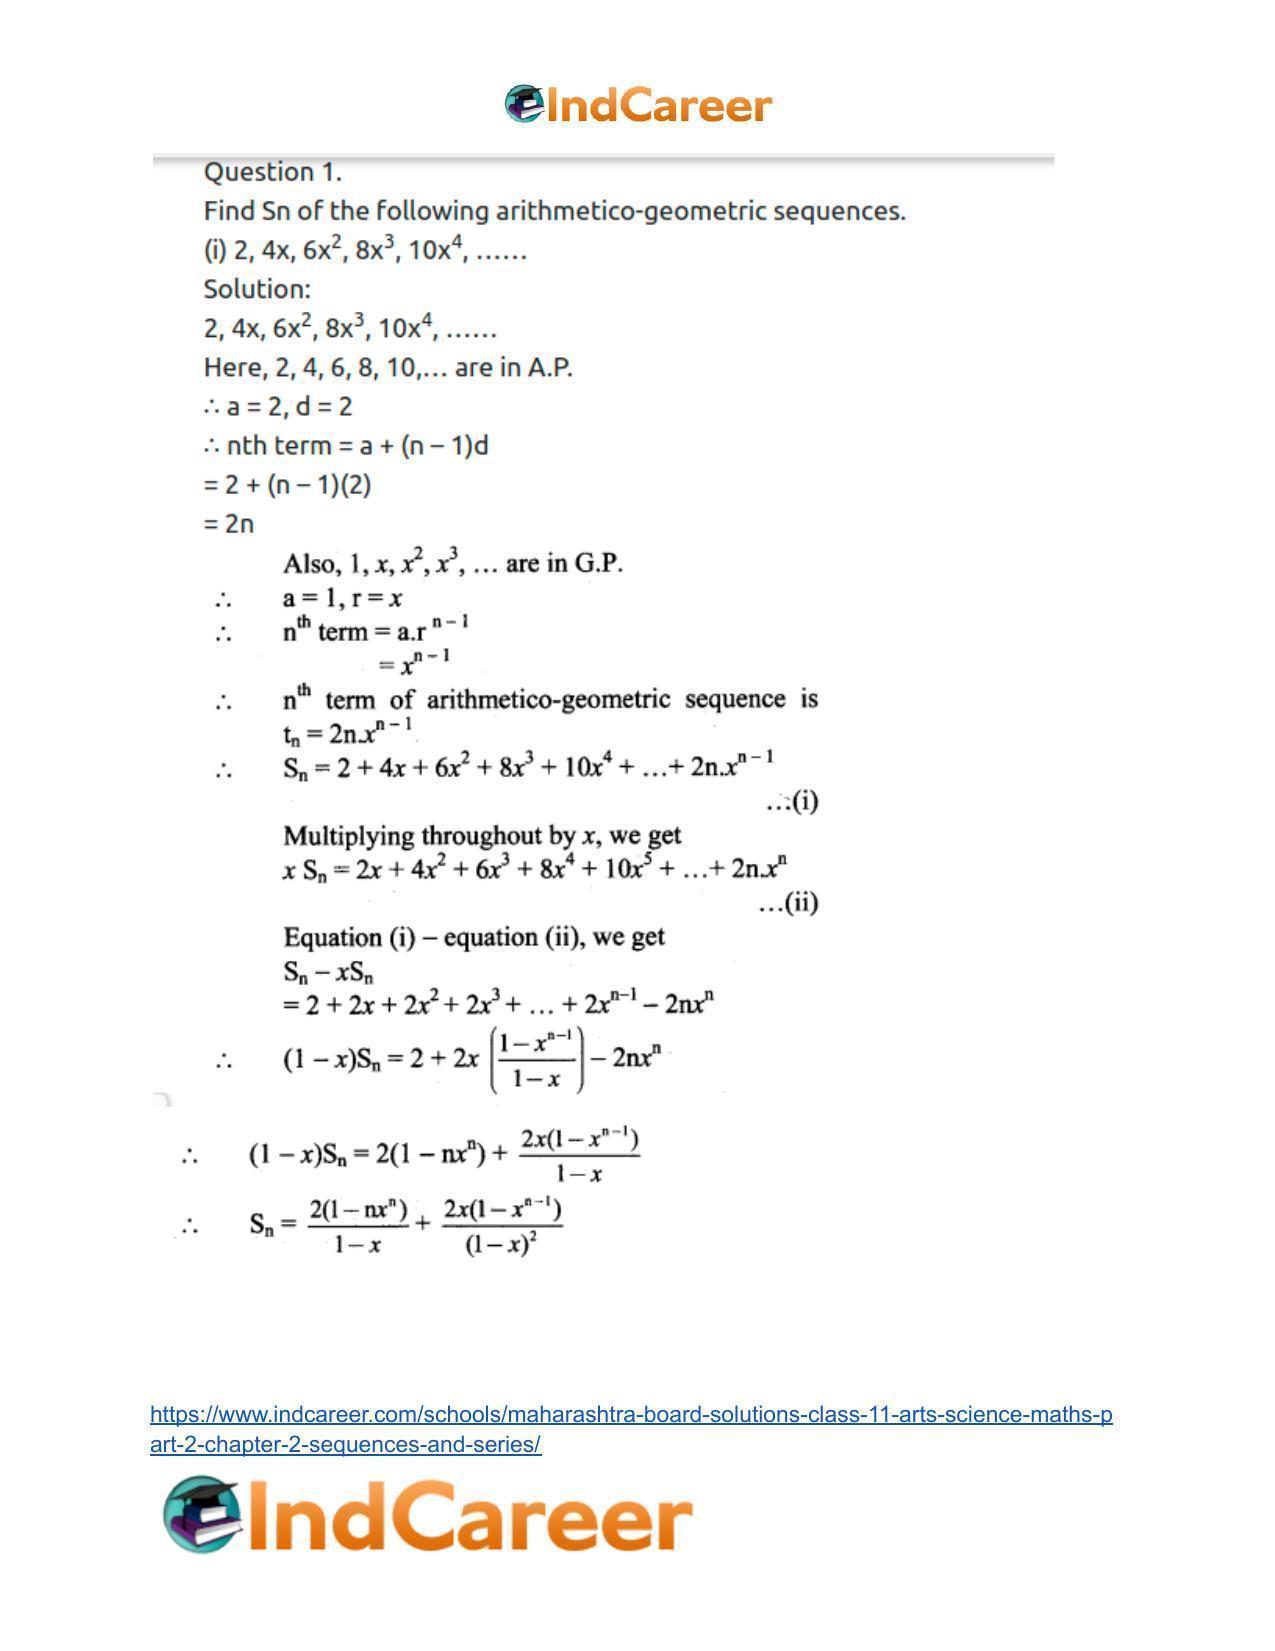 Maharashtra Board Solutions Class 11-Arts & Science Maths (Part 2): Chapter 2- Sequences and Series - Page 60